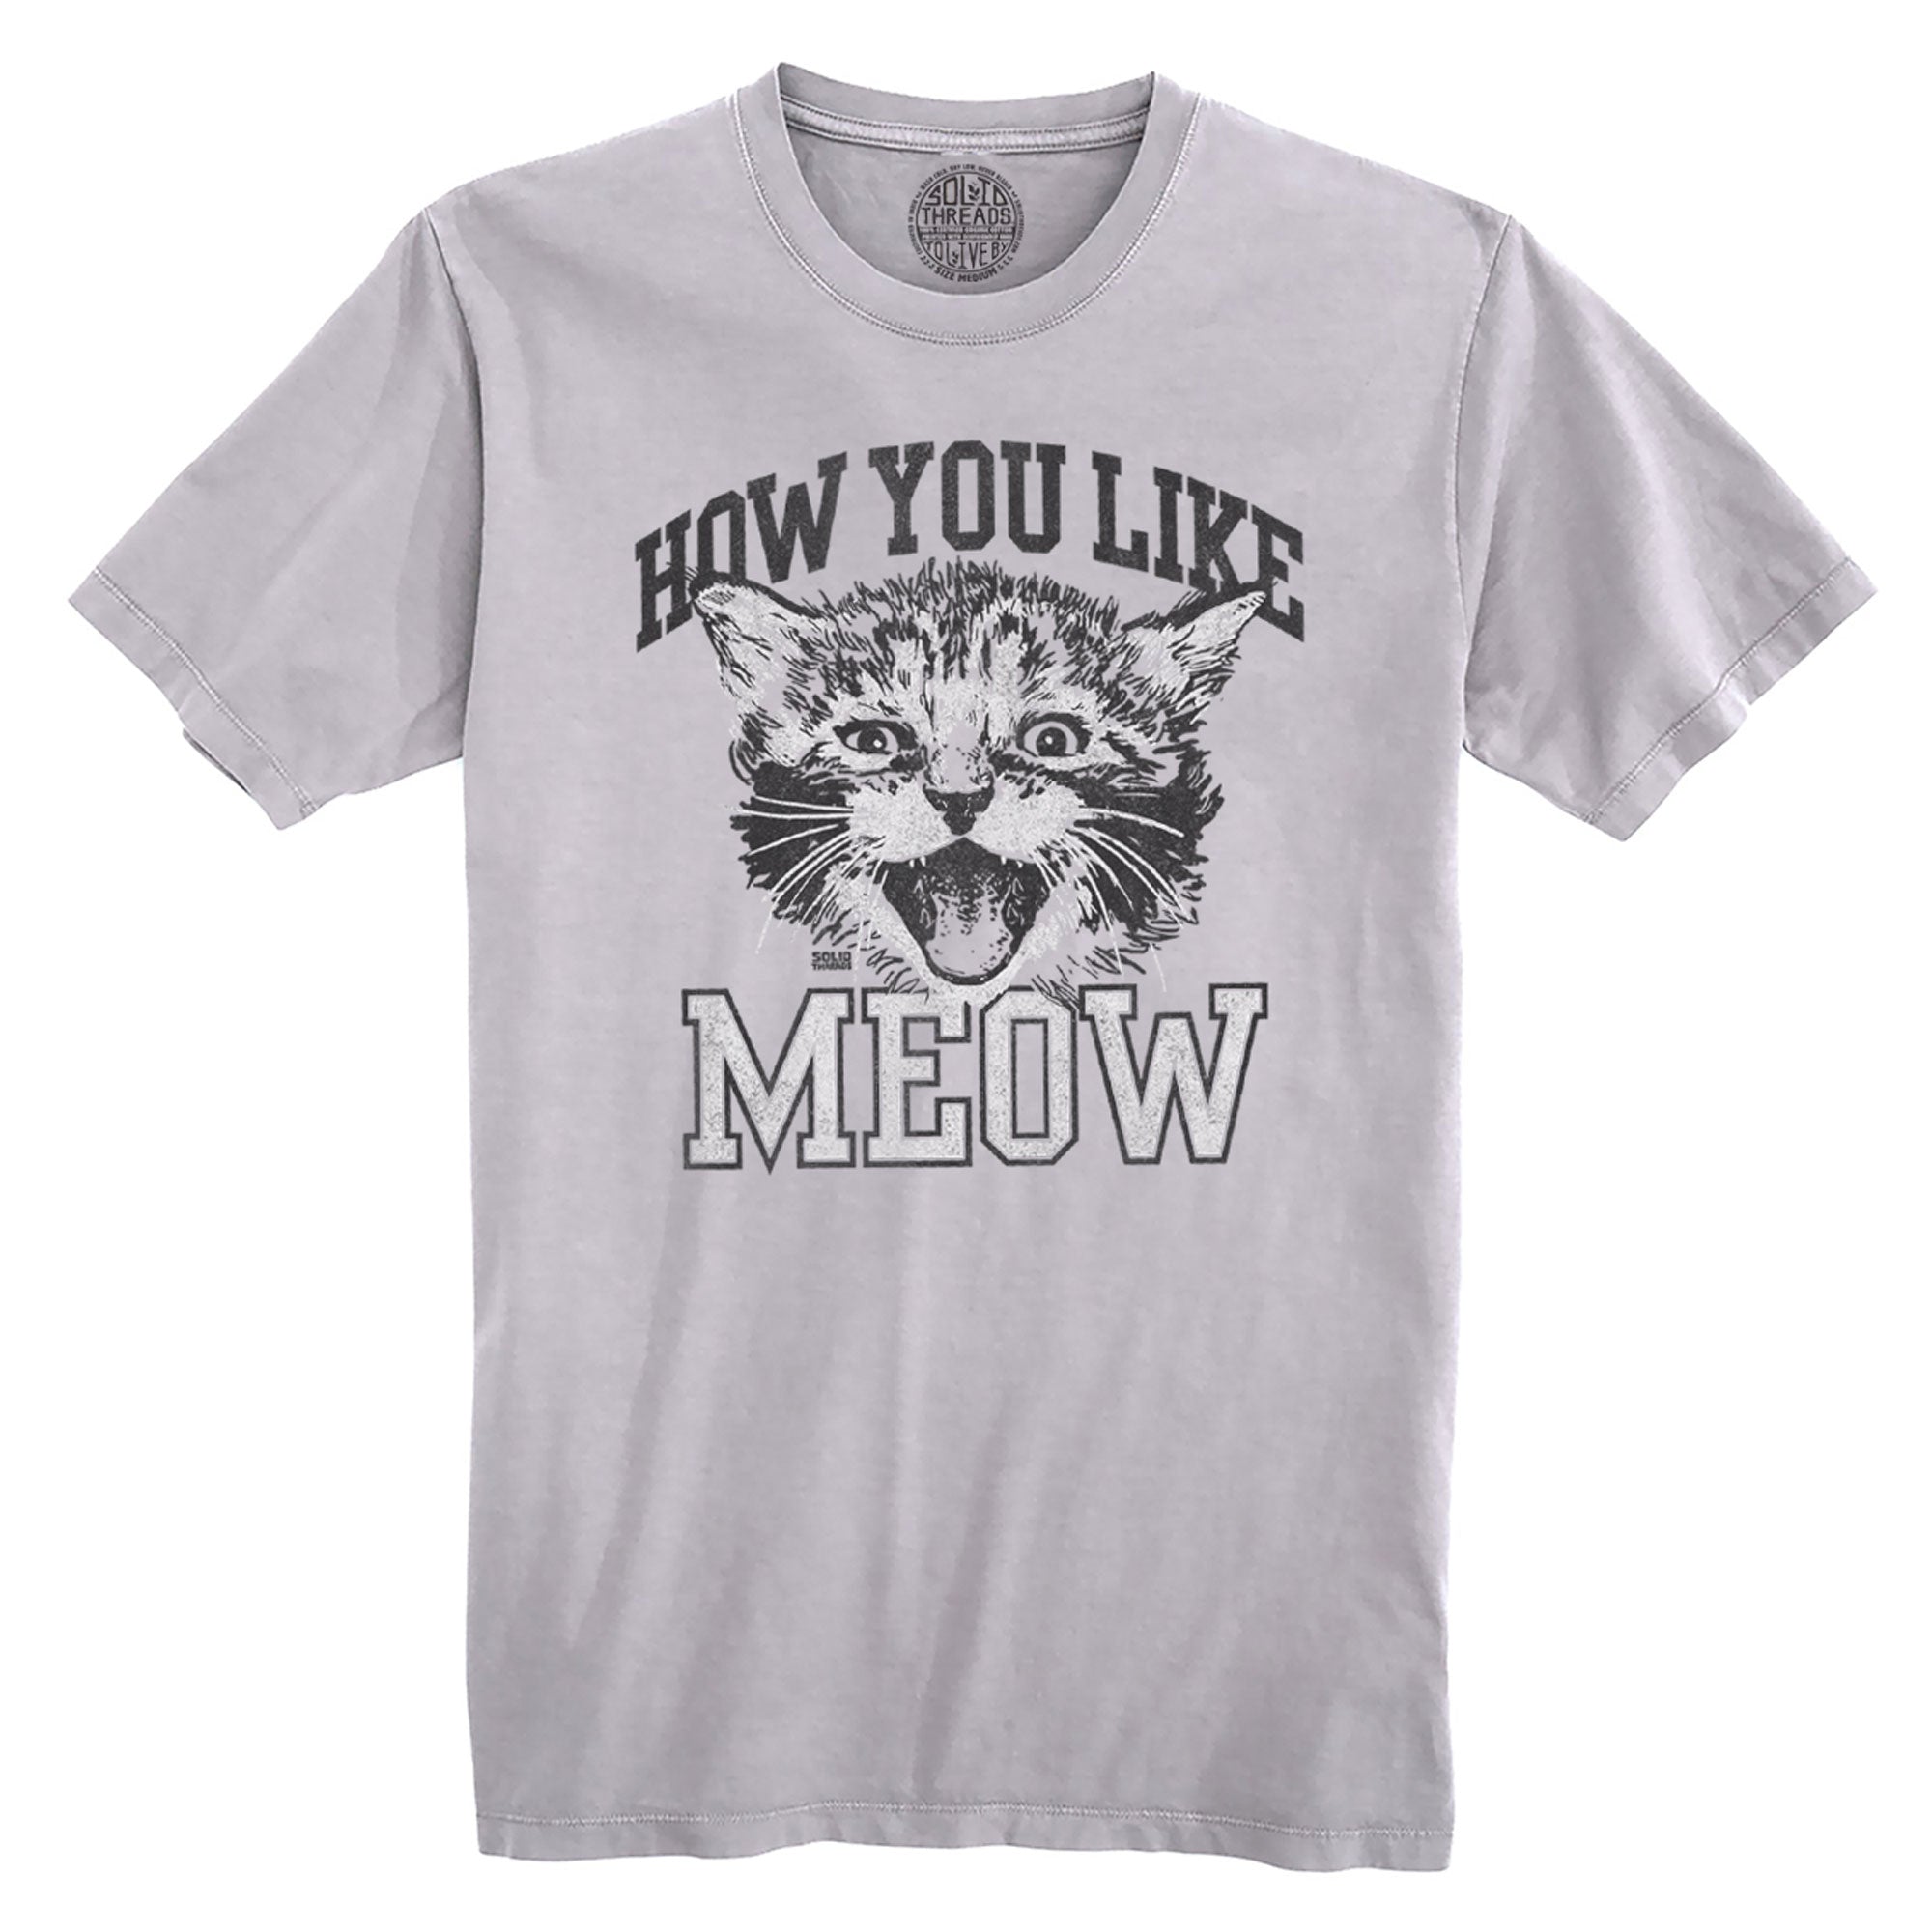 How You Like Meow Vintage Organic Cotton T-shirt | Funny Cat   Tee | Solid Threads